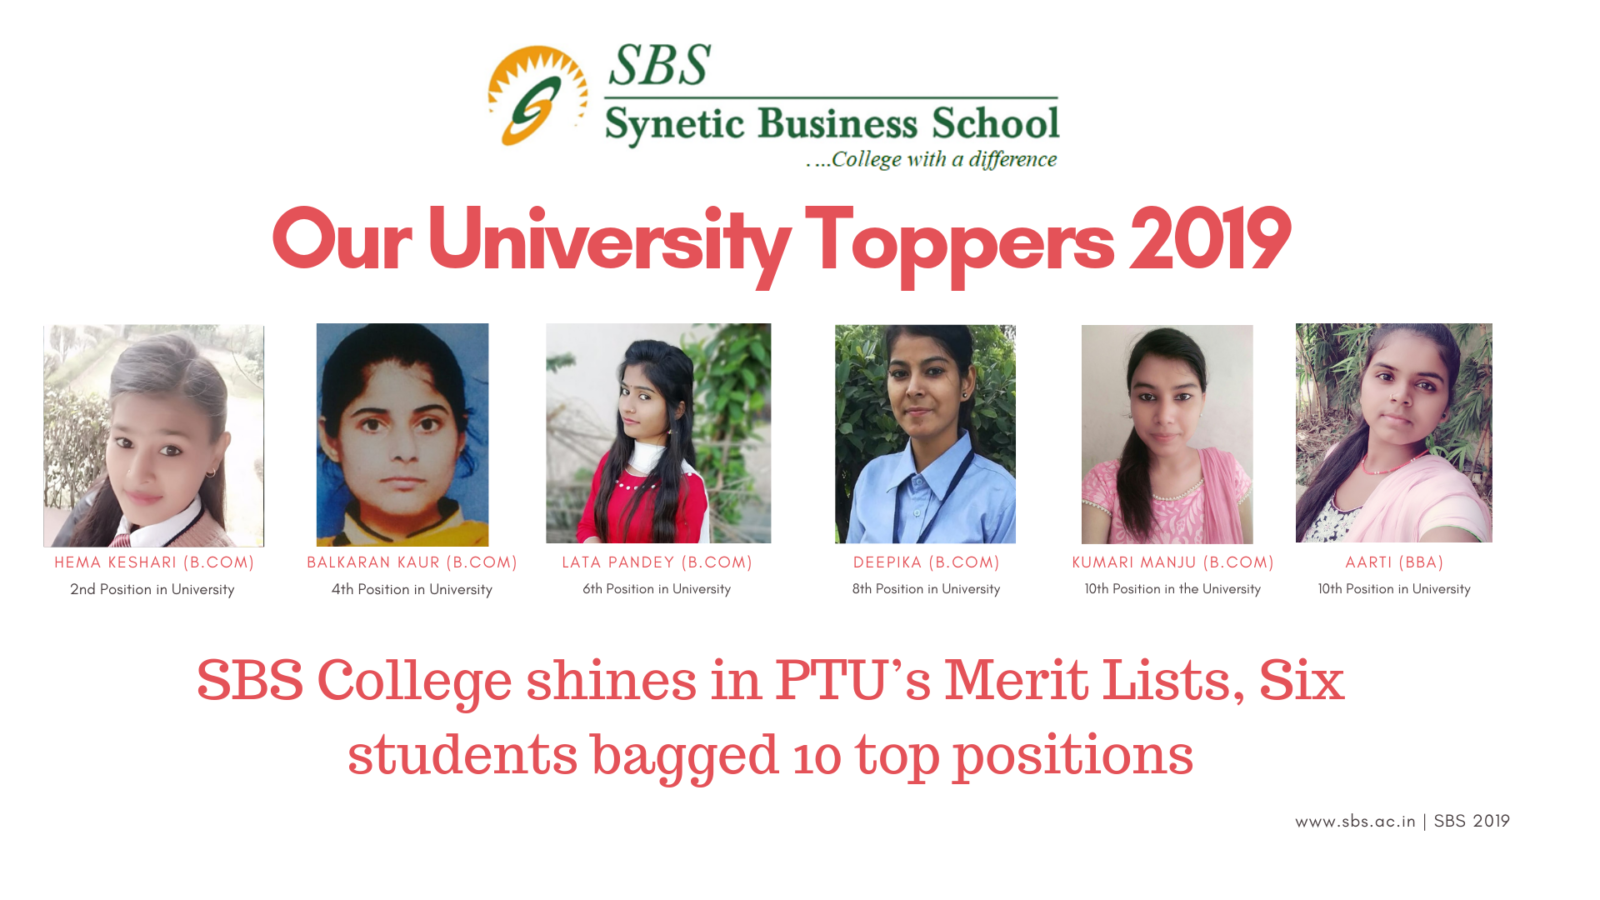 SBS College shines in PTU’s Merit Lists, Six students bagged 10 top positions